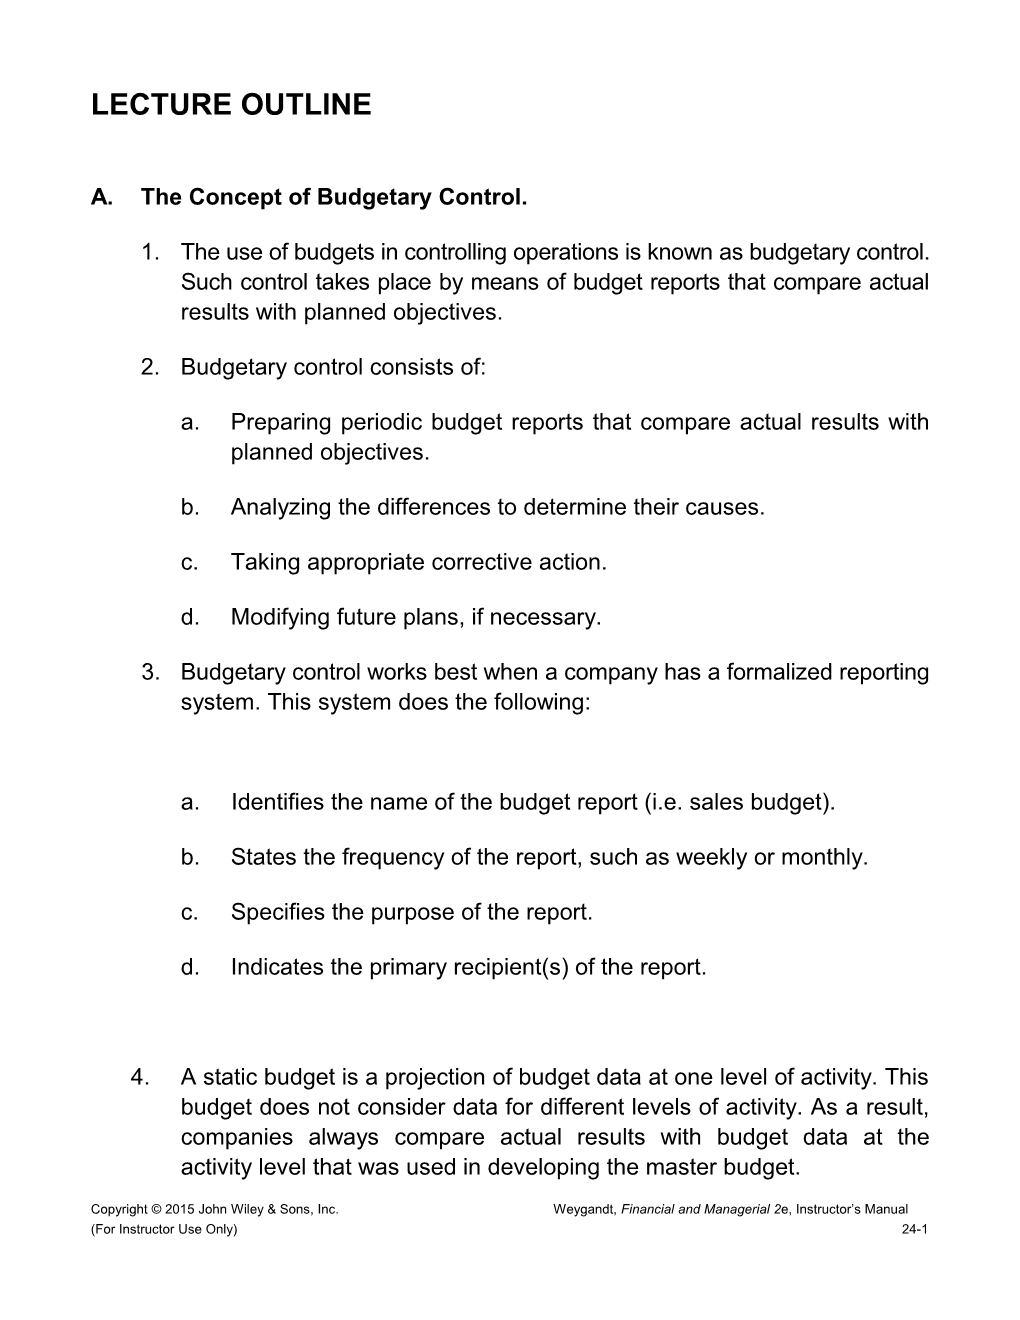 A. the Concept of Budgetary Control